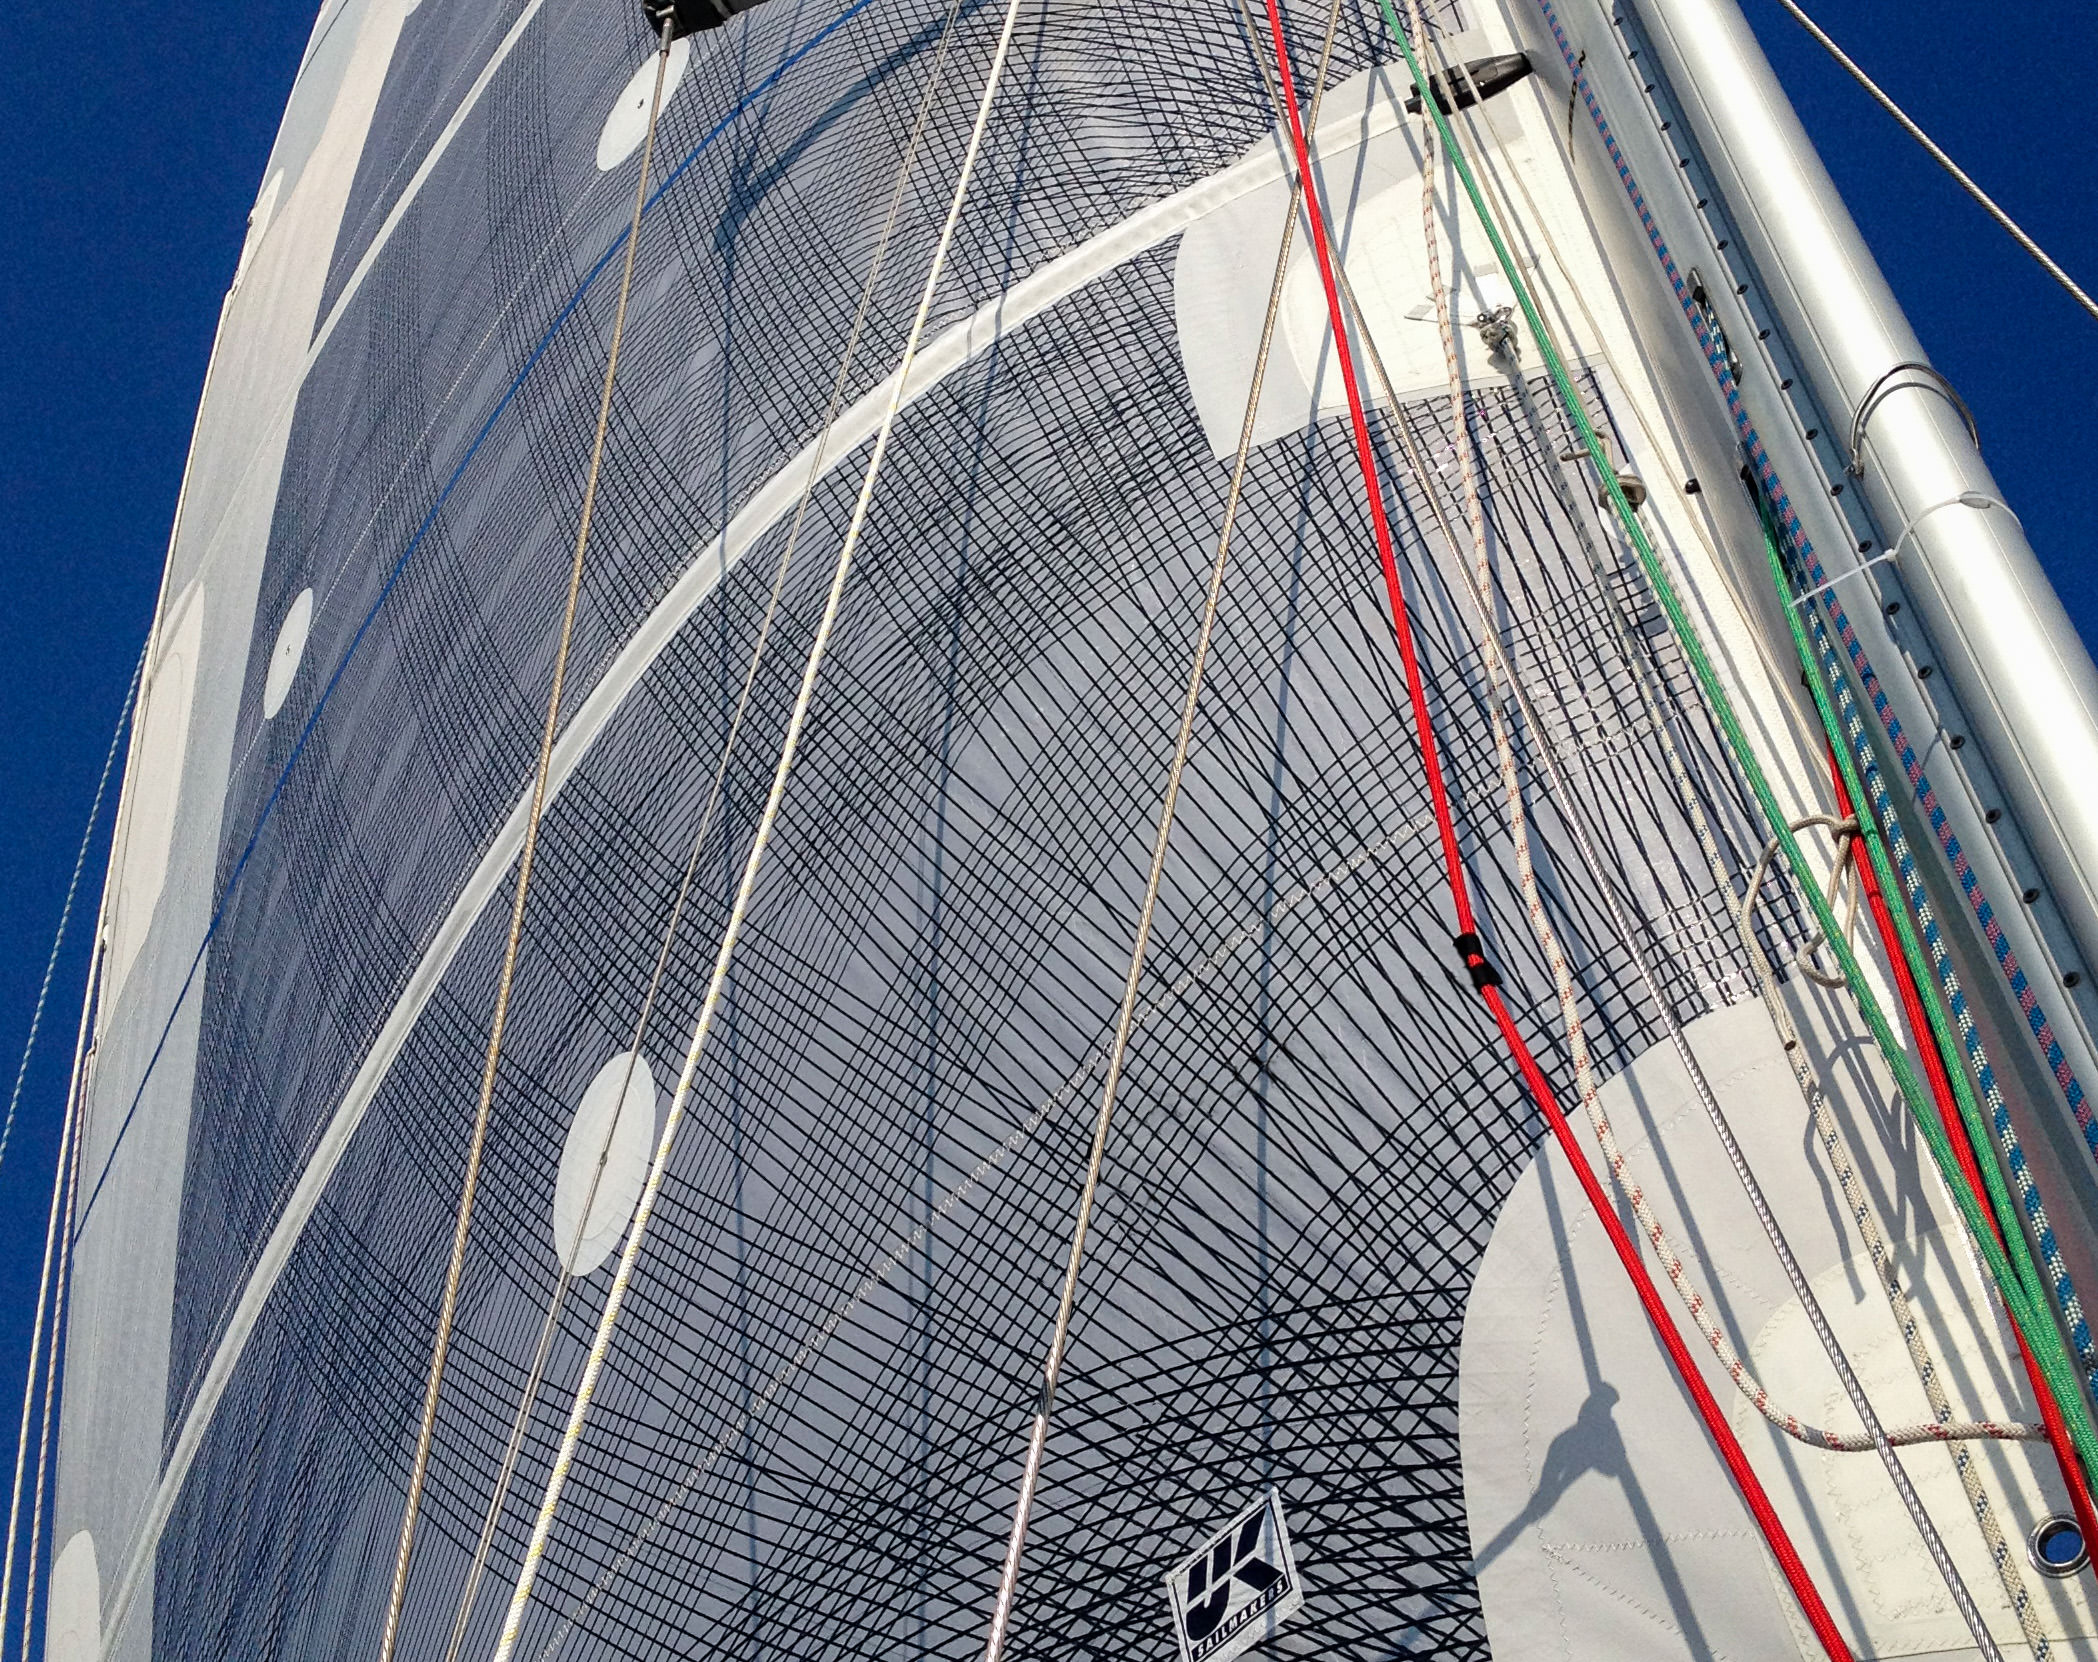 An example of the nearly full coverage of carbon fibers on a mainsail.